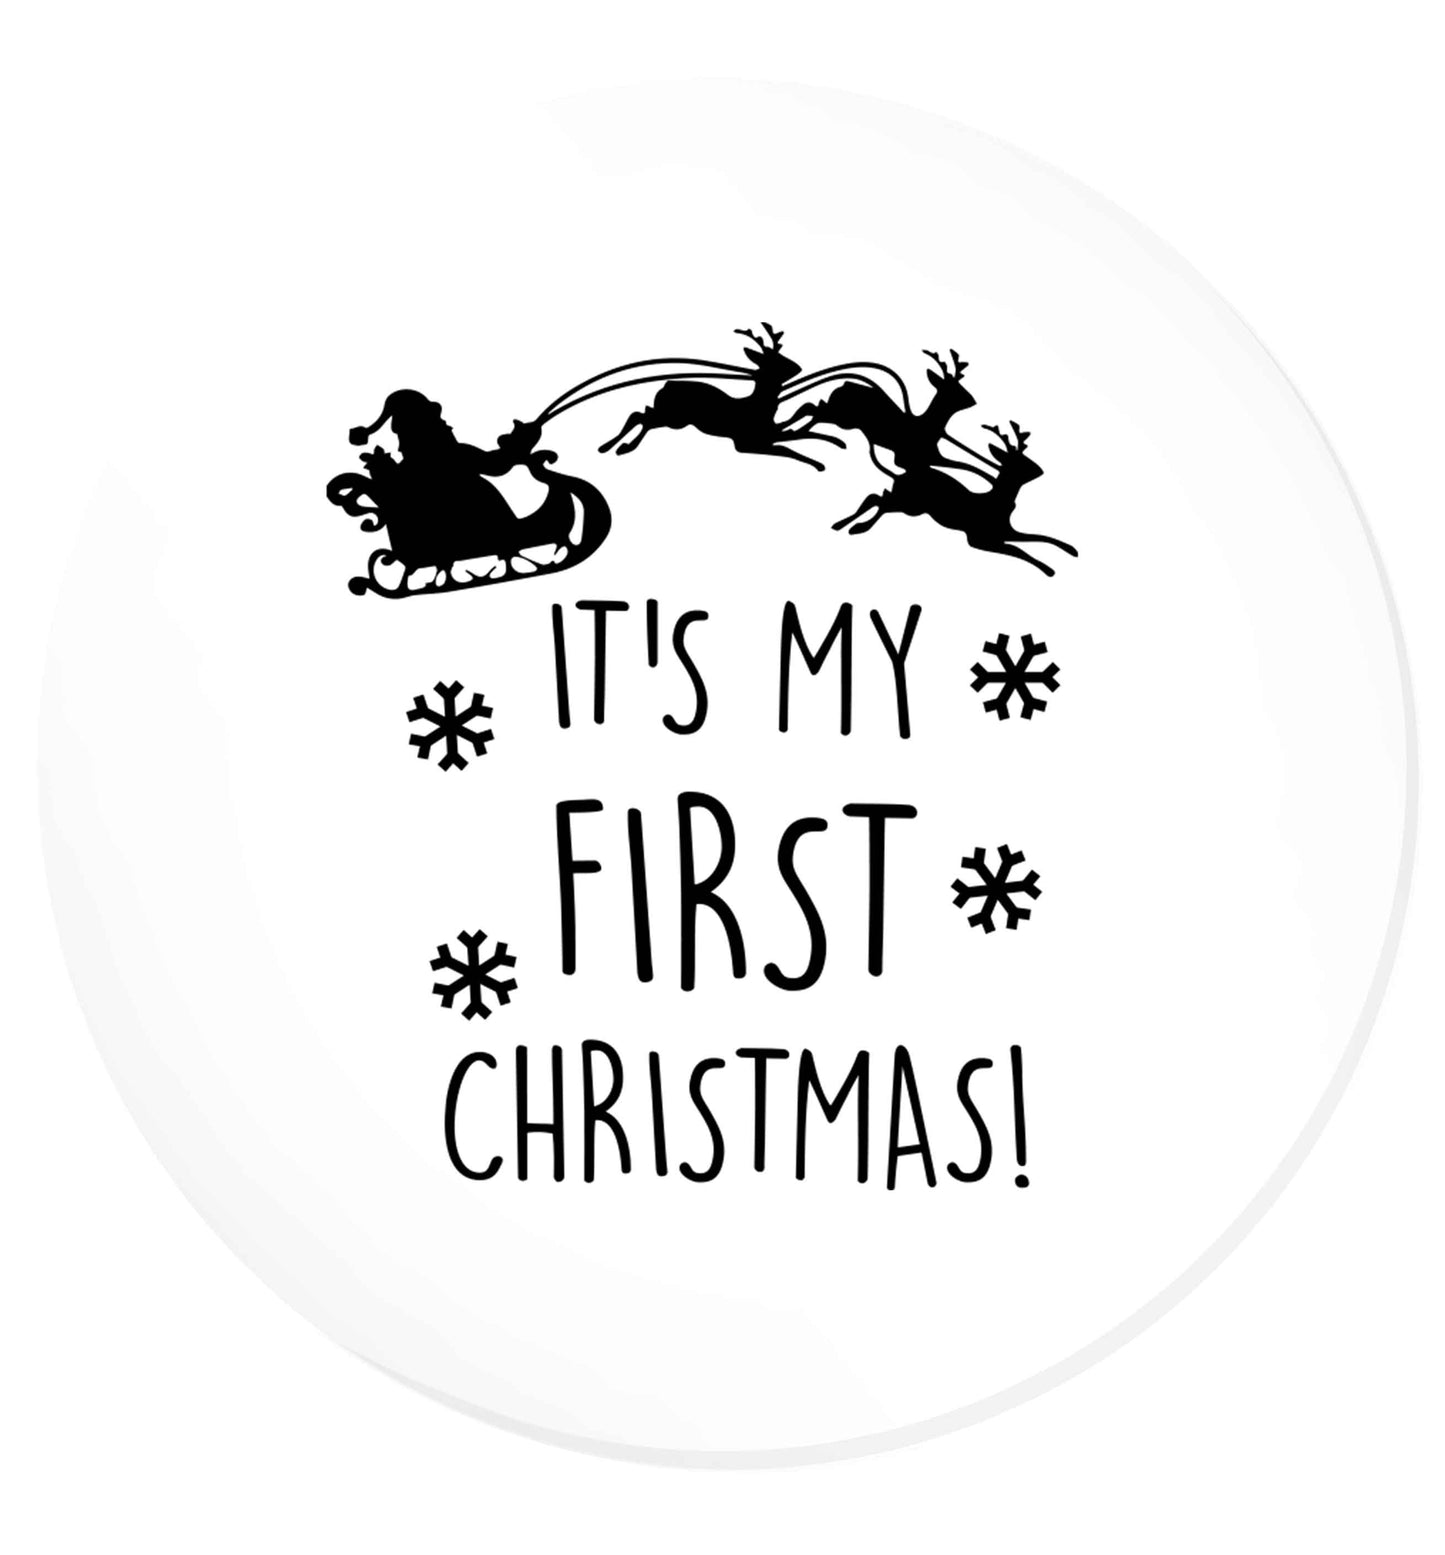 It's my first Christmas - Santa sleigh text | Magnet